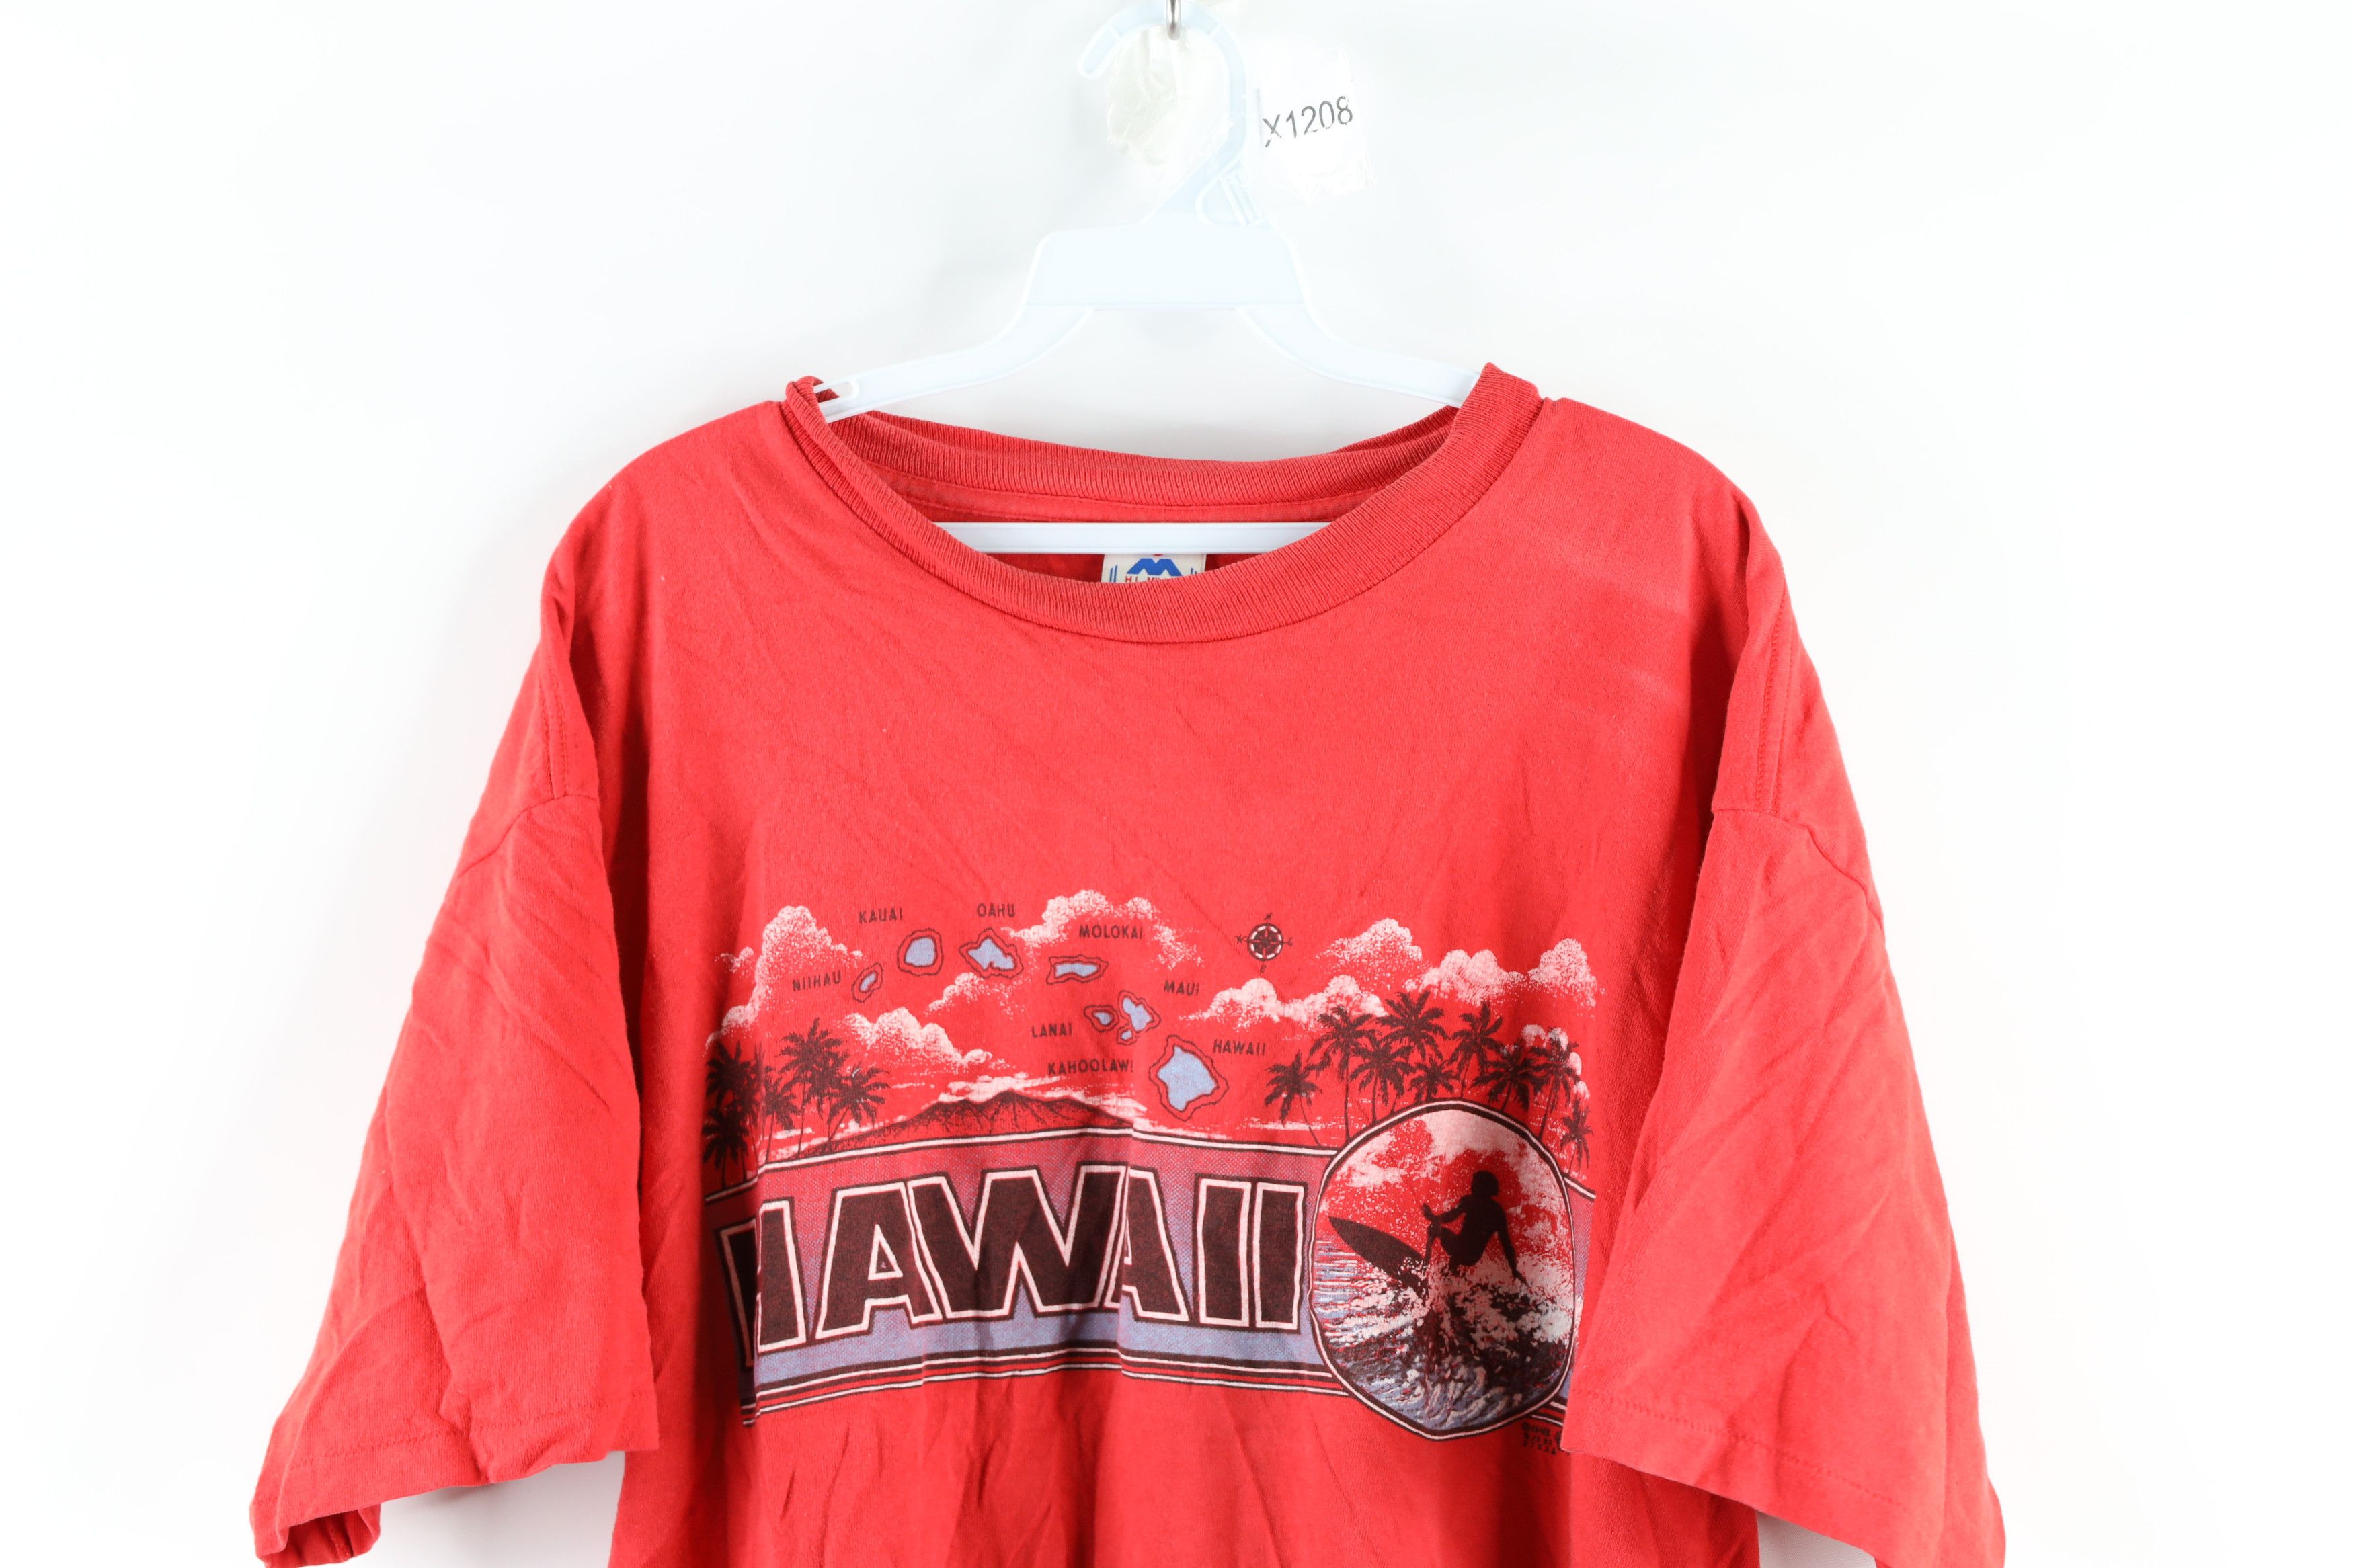 Vintage Vintage 80s Streetwear Thrashed Hawaii Surfing T-Shirt Red Size US XL / EU 56 / 4 - 2 Preview